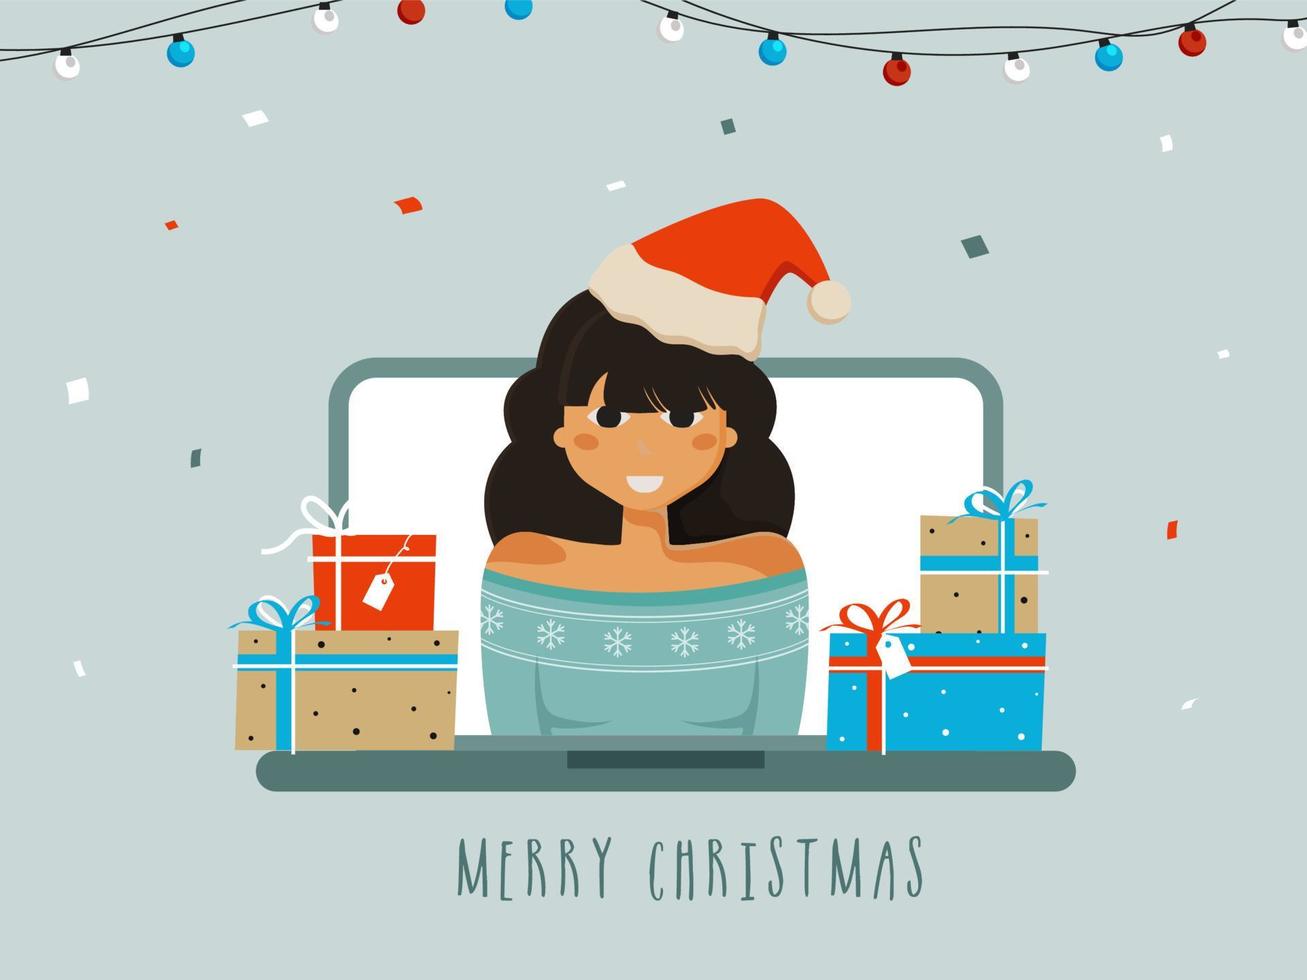 Young Girl Wearing Santa Hat With Gift Boxes On Laptop Screen For Merry Christmas Celebration. vector